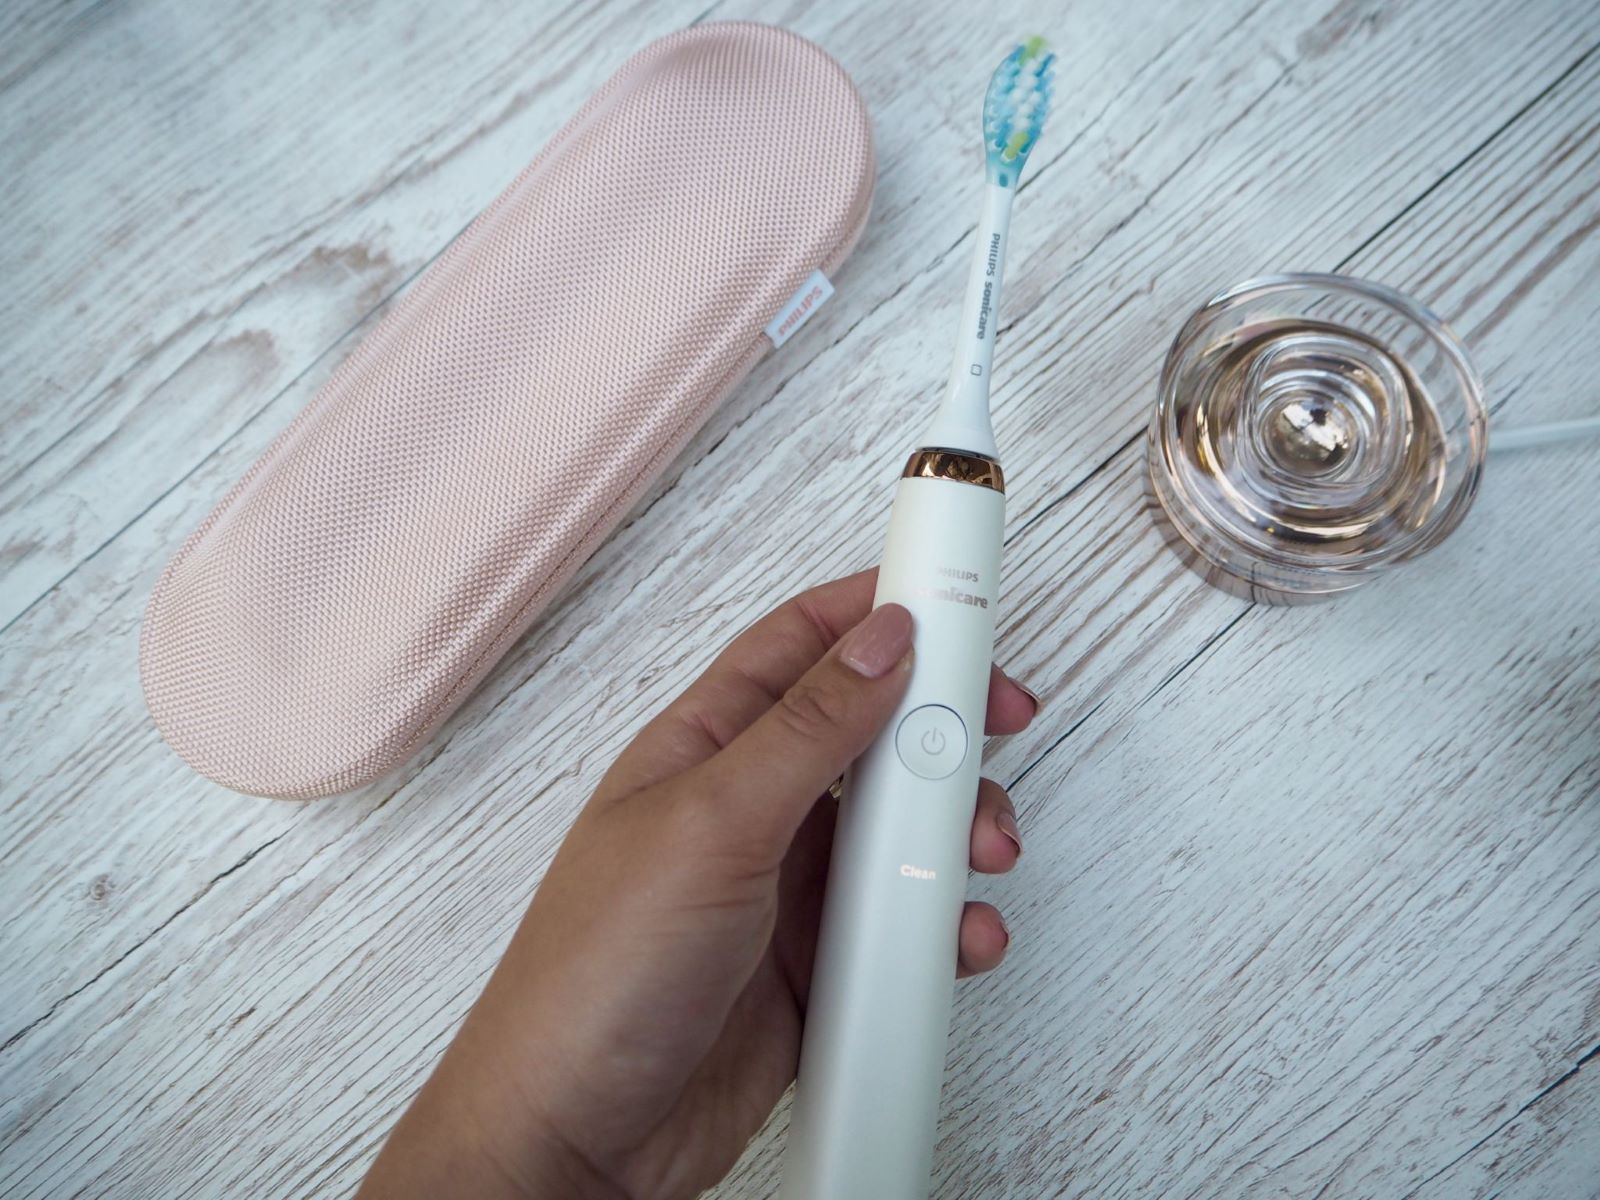 How To Use Sonicare Diamondclean Toothbrush